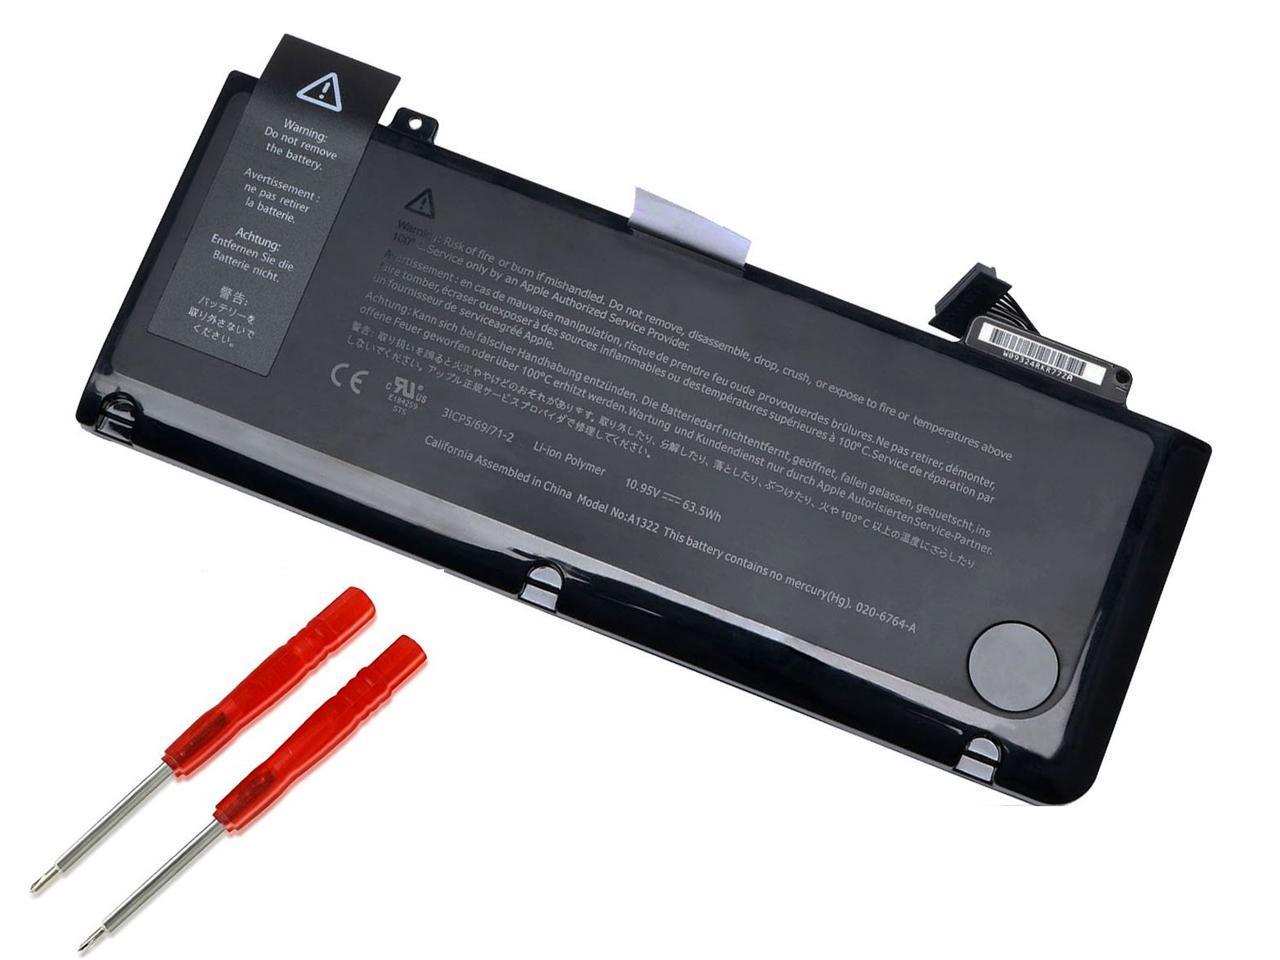 Genuine A1322 Battery For Apple Macbook Pro 13 A1322 A1278 Mid 09 10 Late 11 Mid 12 Version Newegg Com